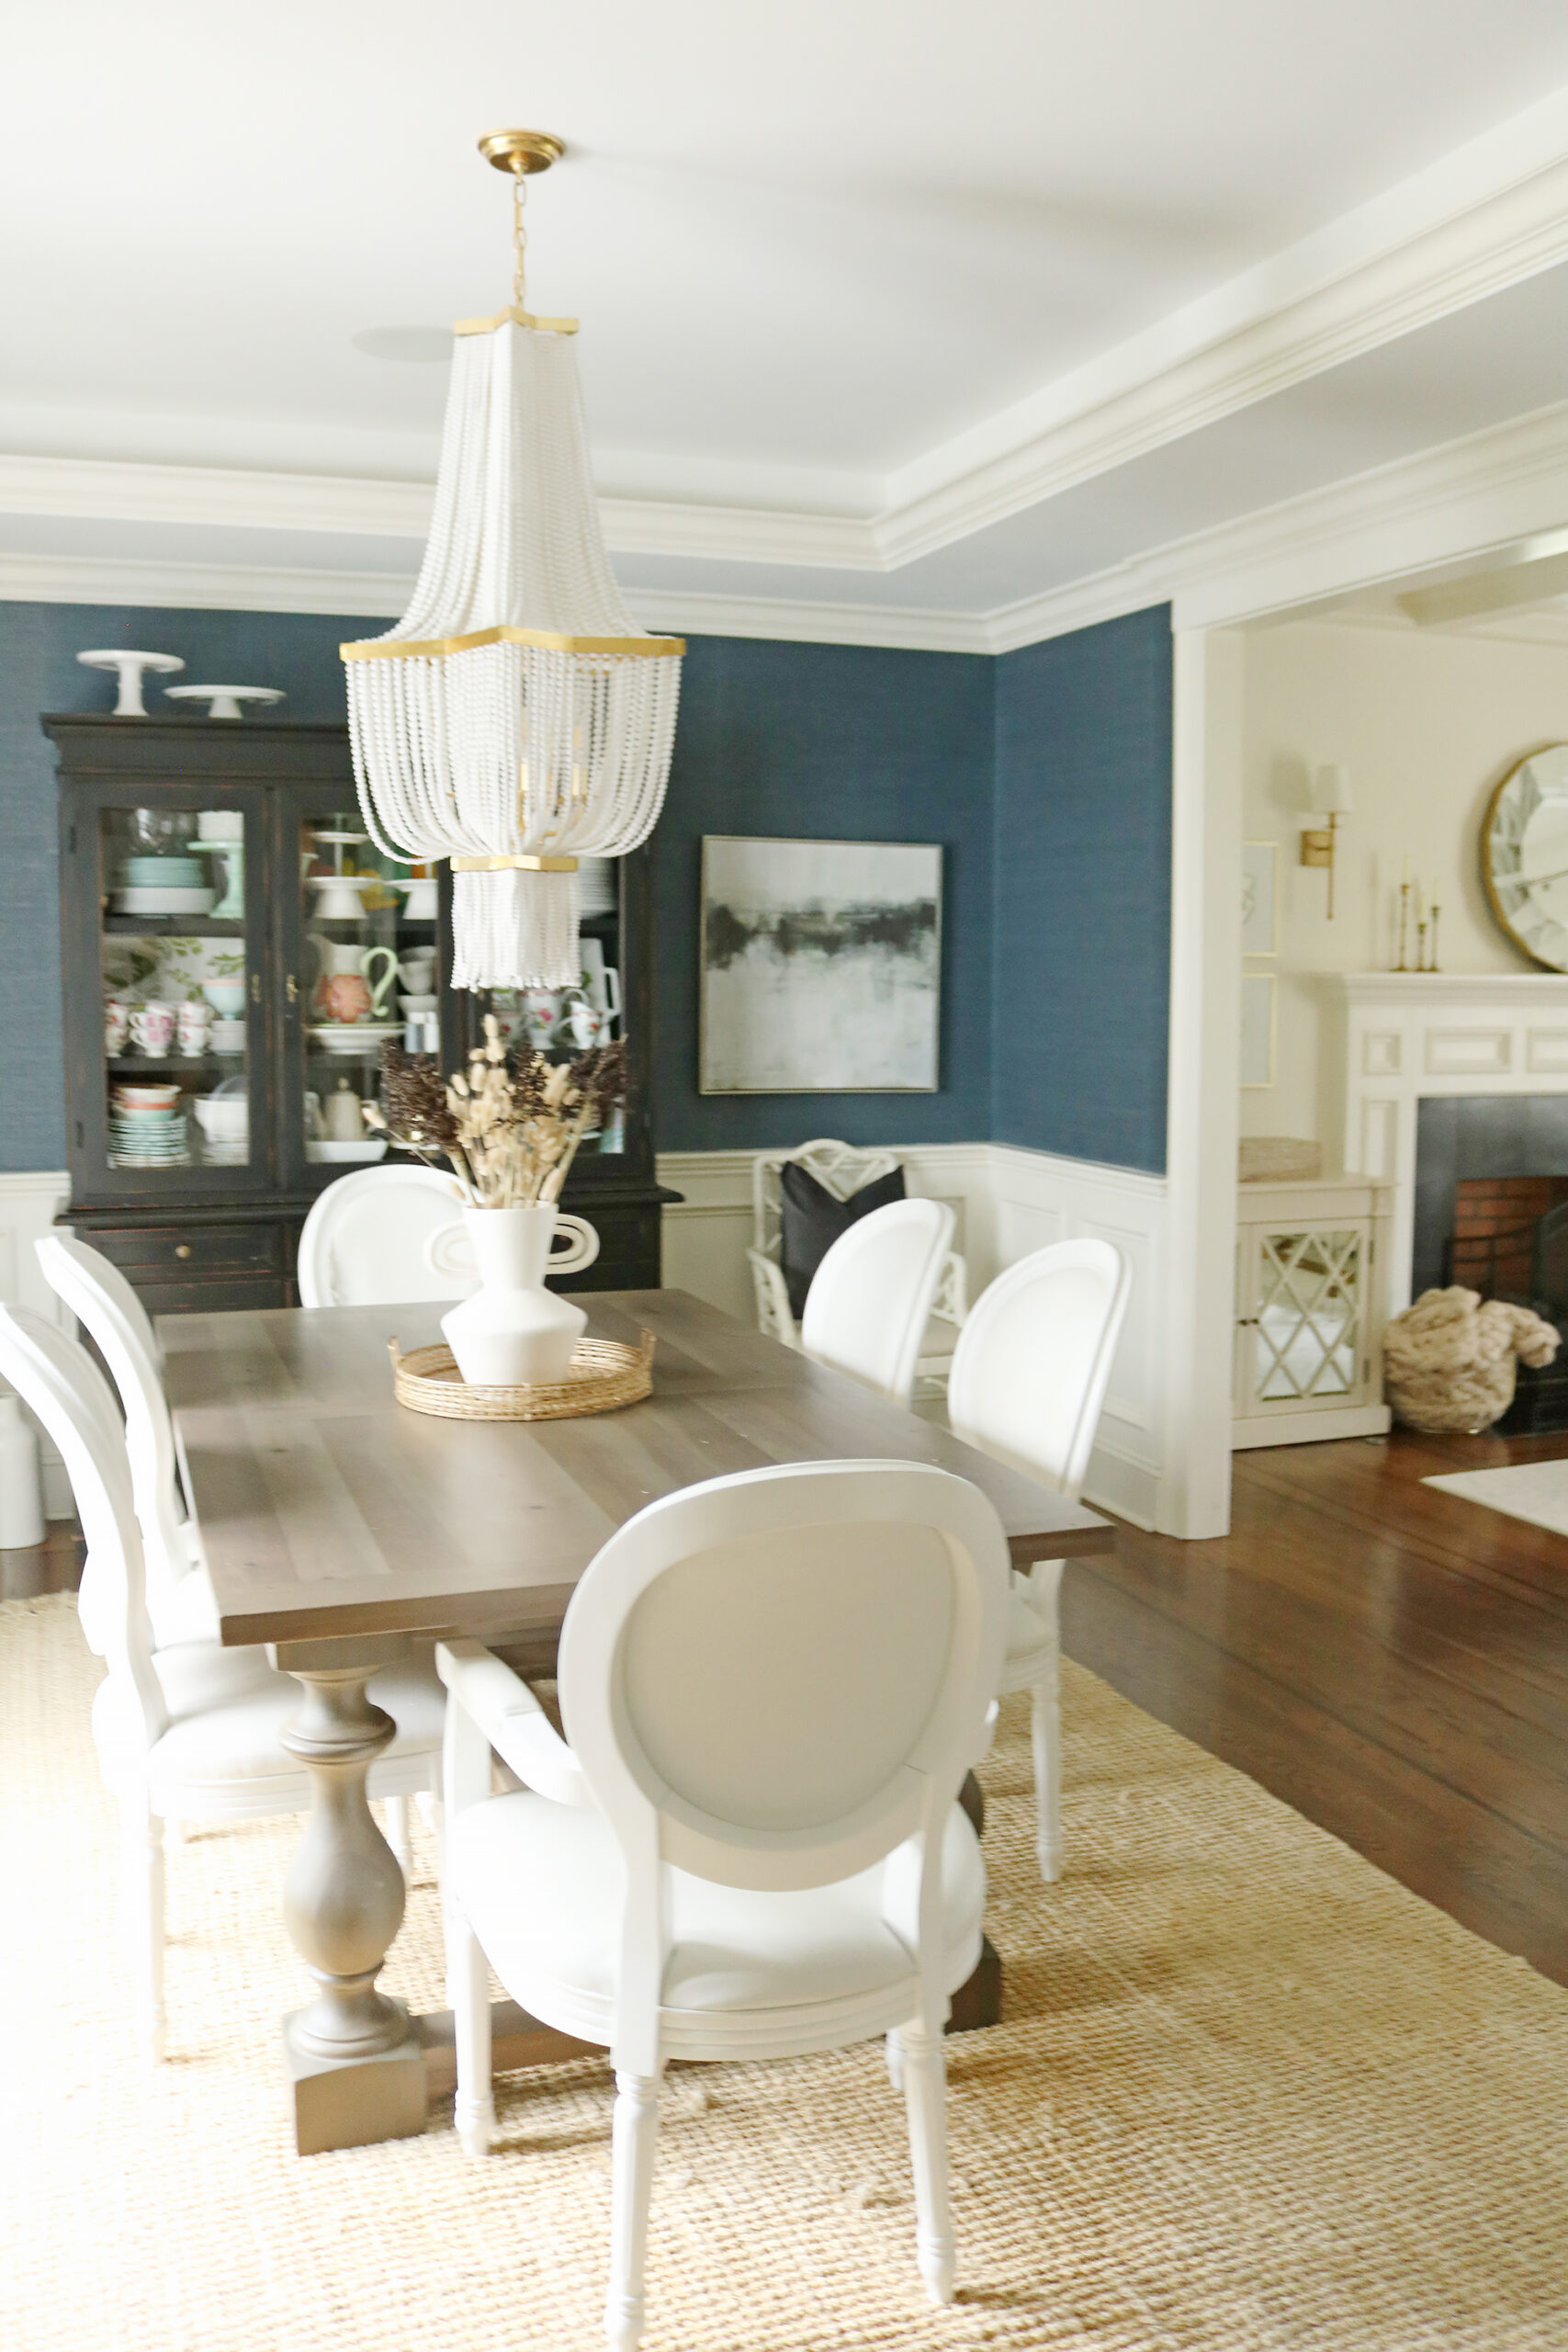 From Muddy Brown to Moody Blues, Our Dining room before and after makes small changes for a big difference and updated stylish look. || Darling Darleen Top CT Lifestyle Blogger